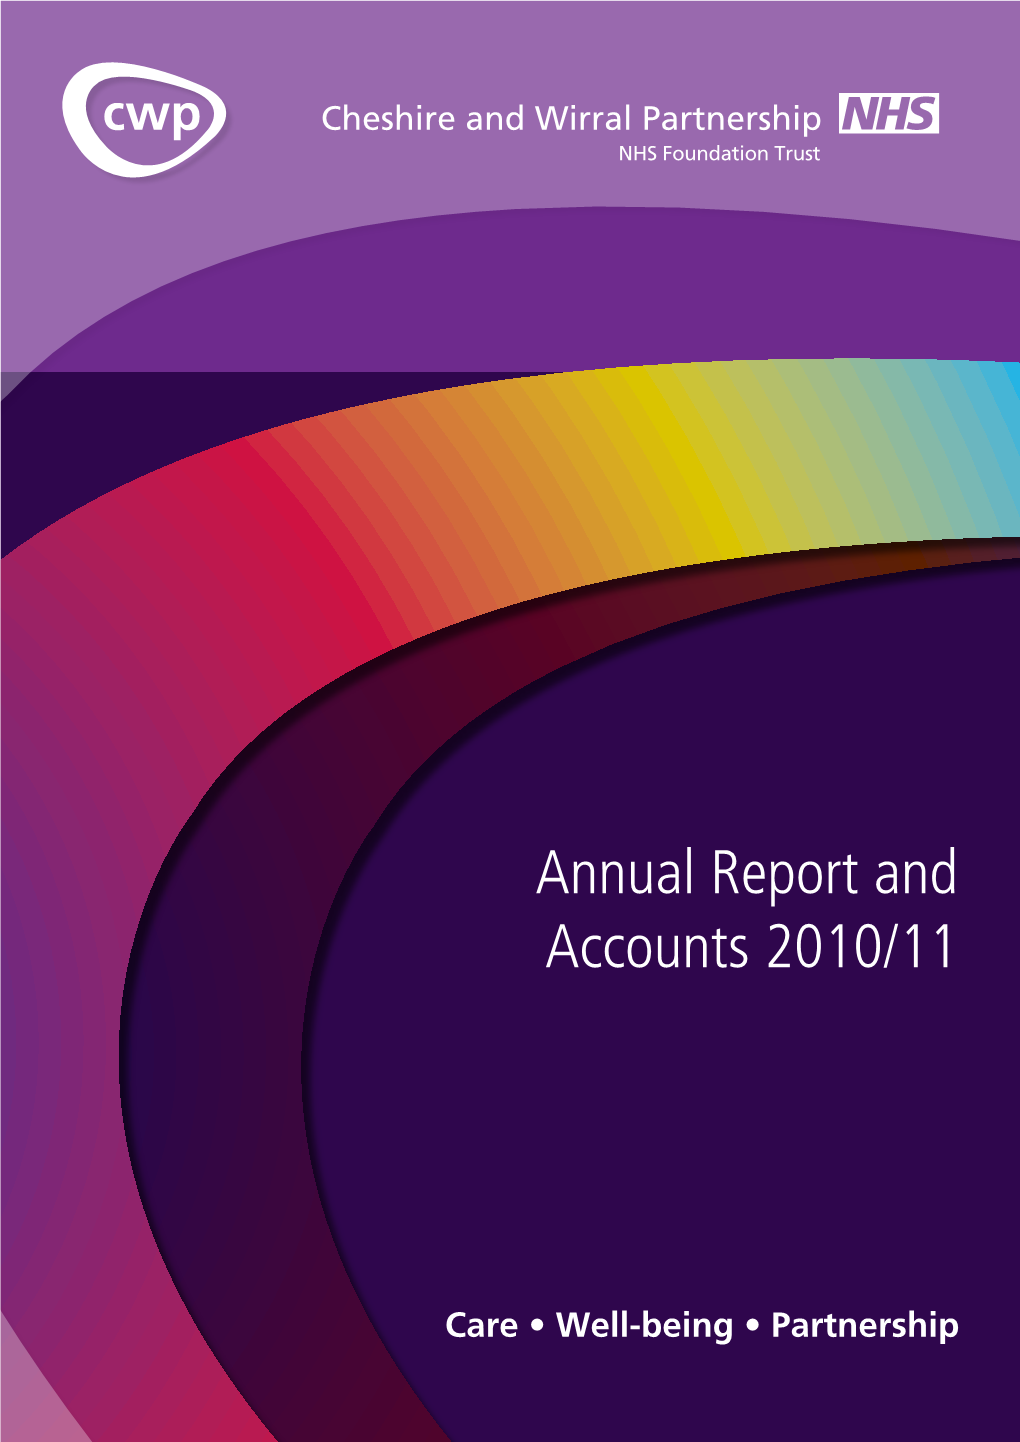 Annual Report and Accounts 2010/11